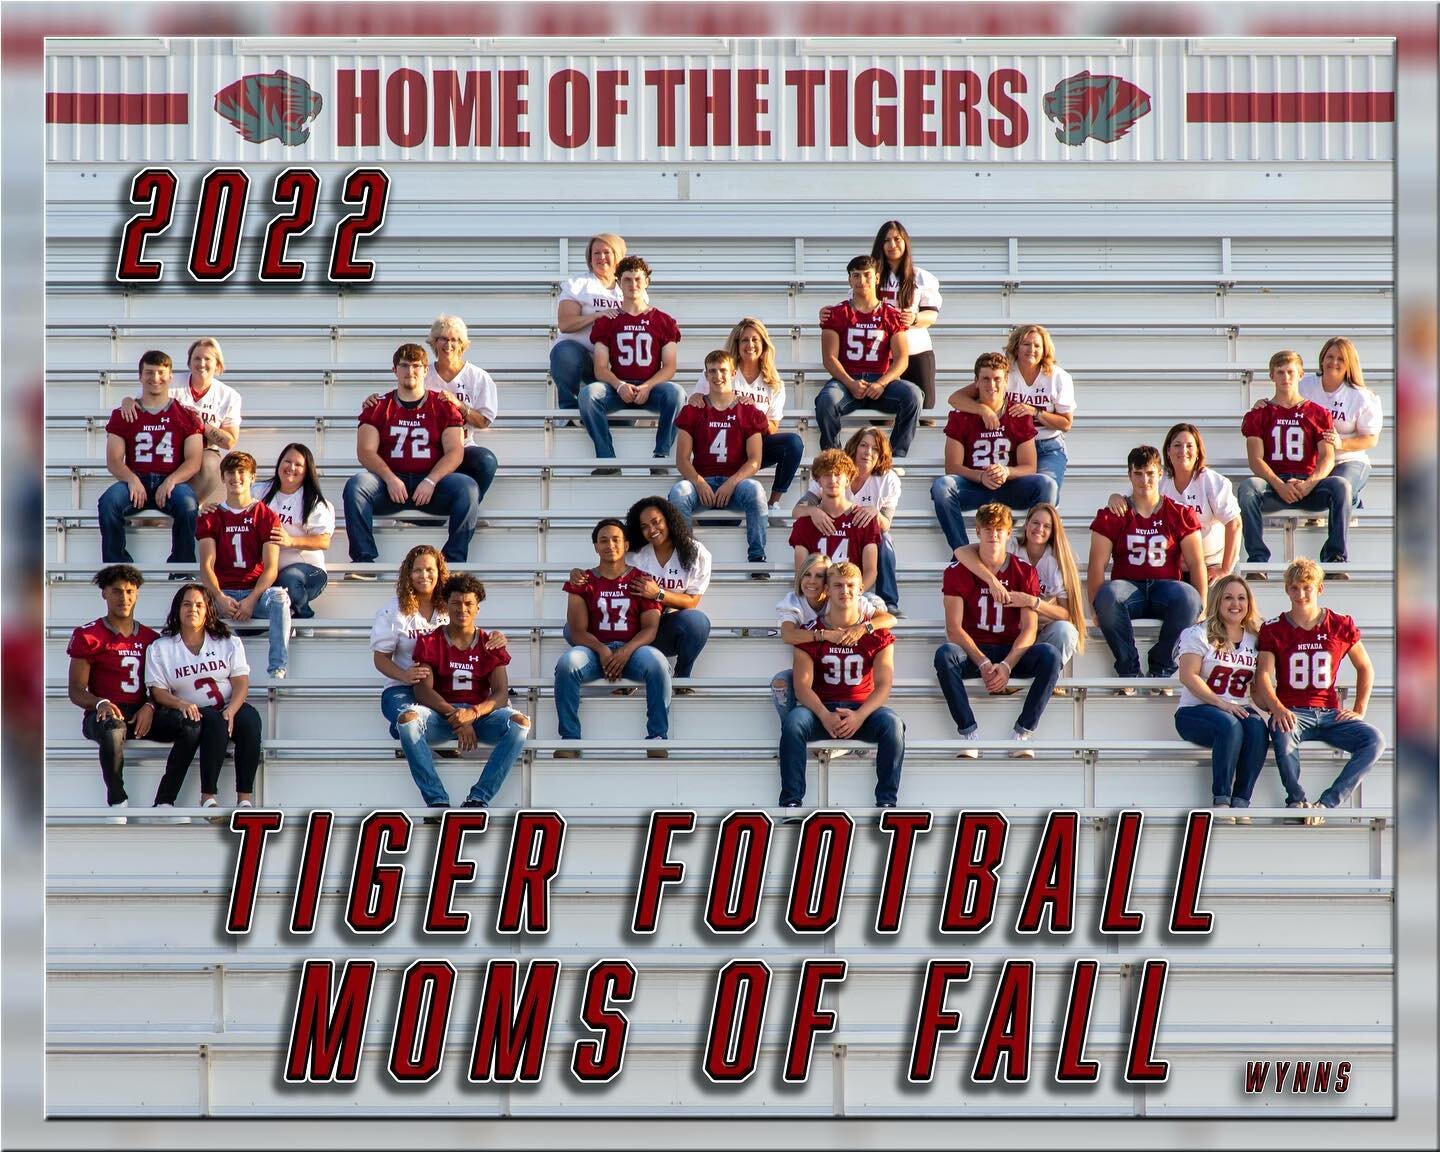 Good luck to these boys and their mamas as they play in the District Championship game tonight against KC Center! Go Tigers!!! We are so proud of you! 🏈🏈🏈